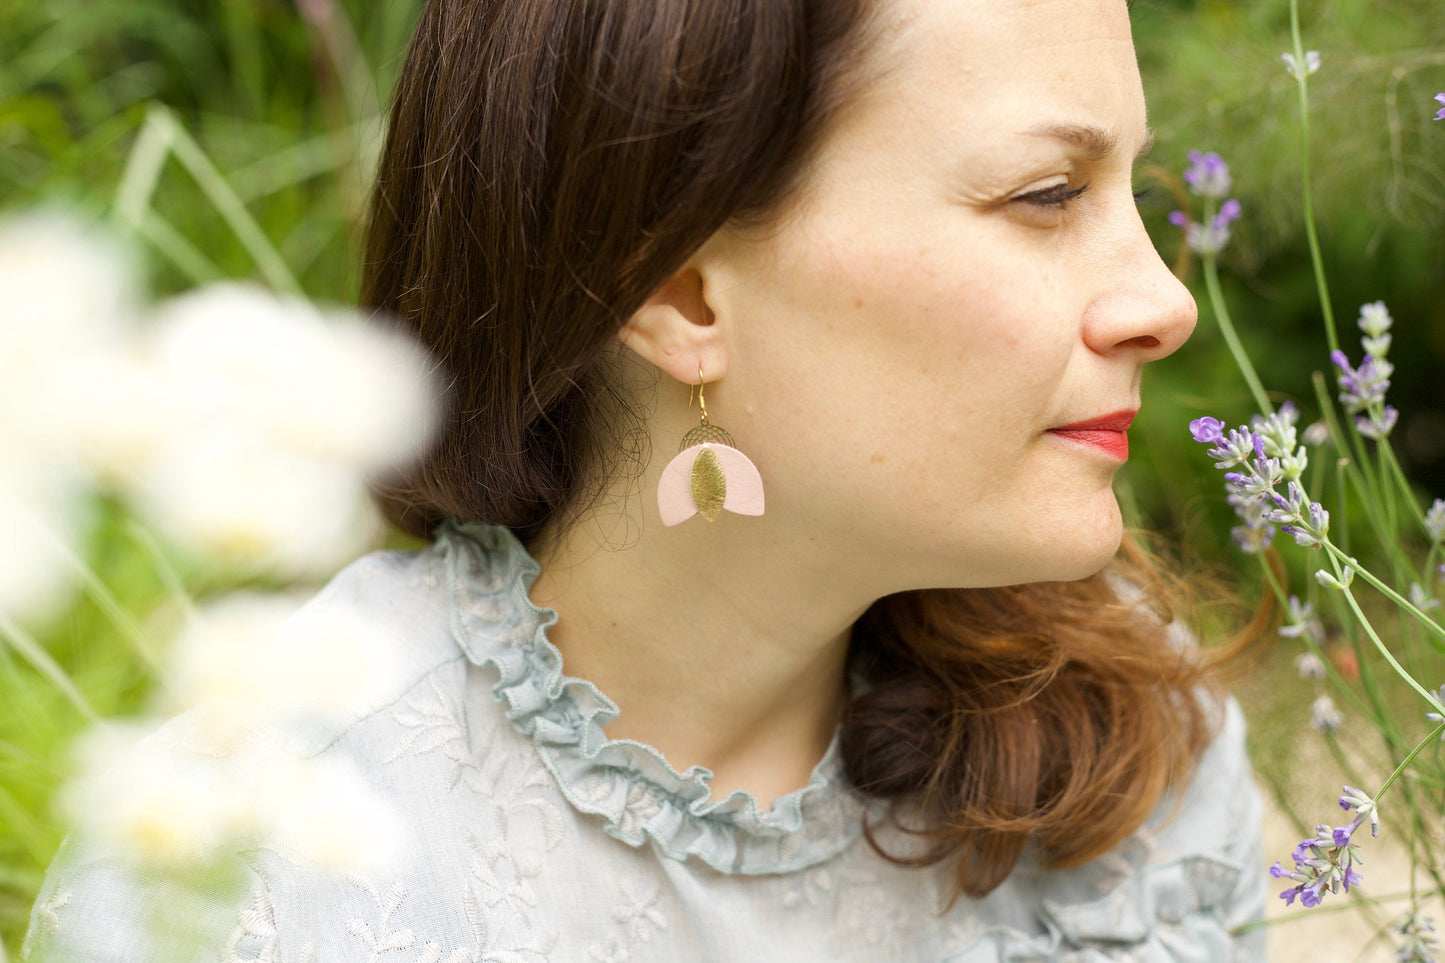 Cigale earrings in beige and gold leather